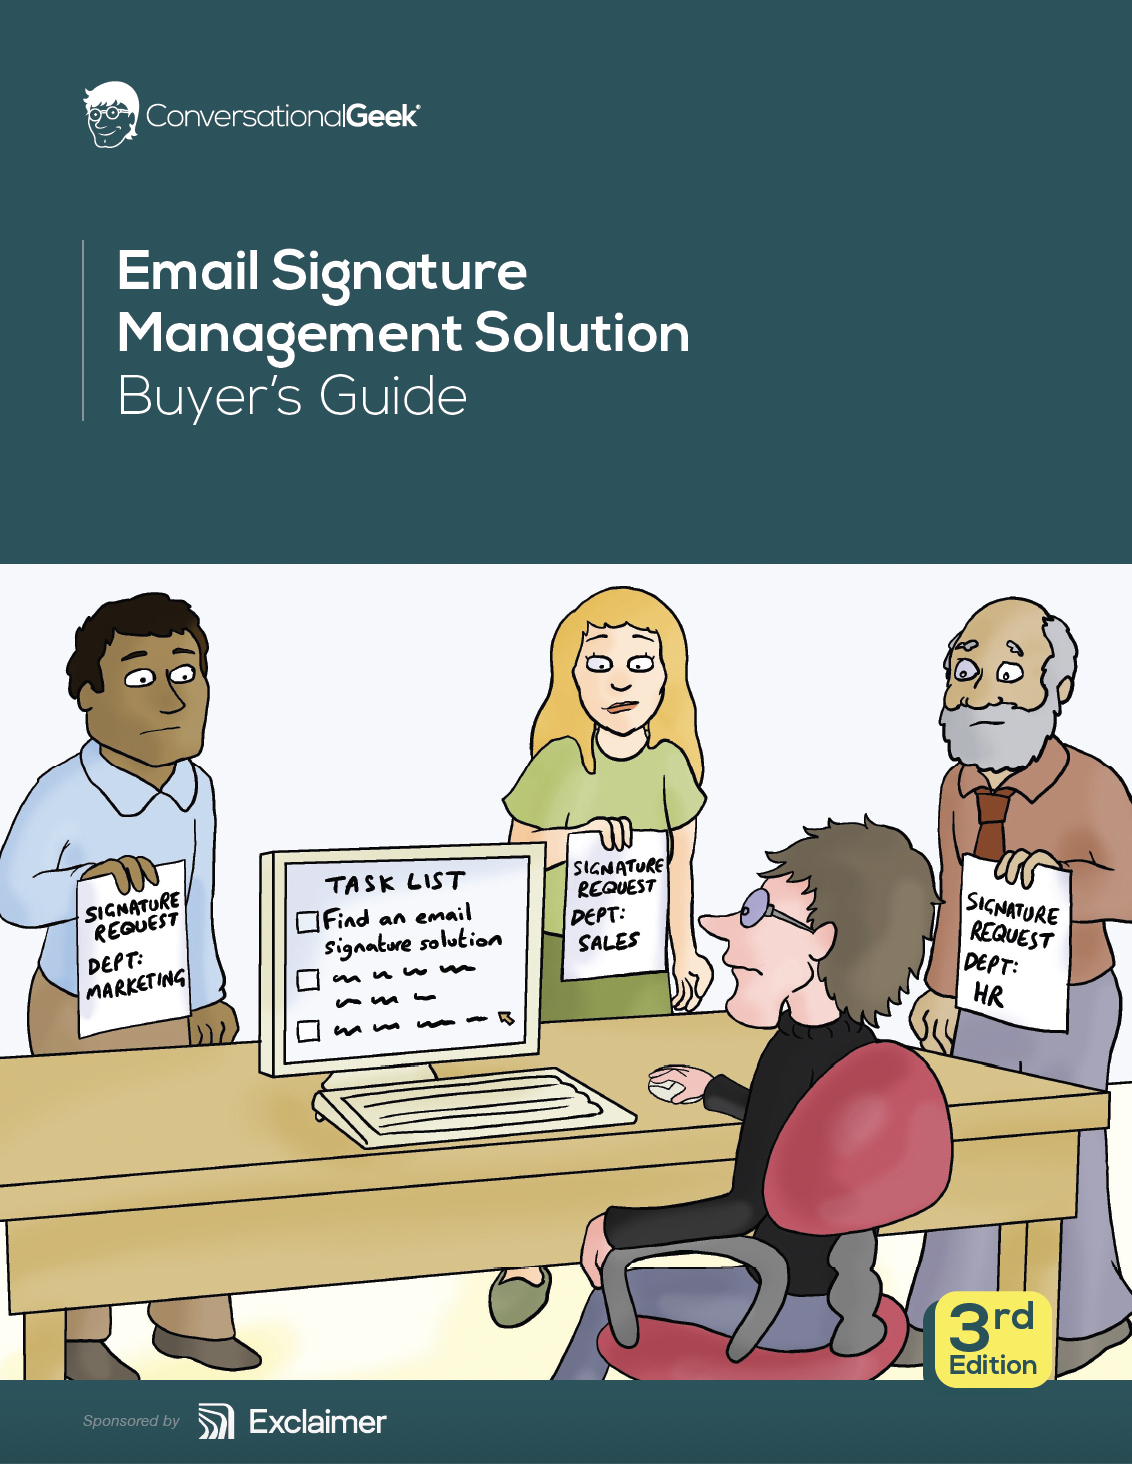 Email Signatures Buyer's Guide 3rd Edition